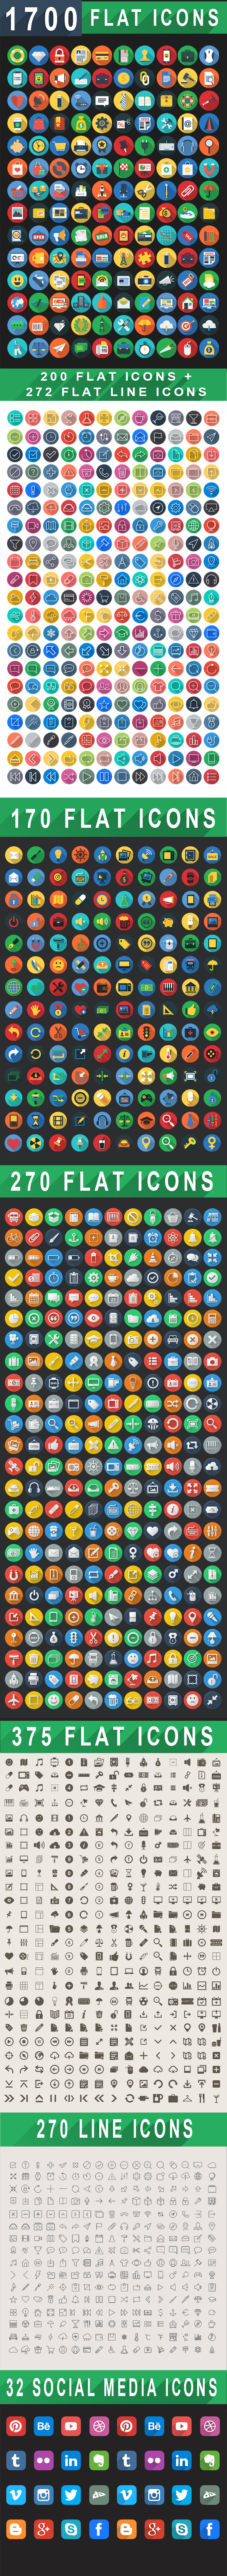 outline icons line icons app icons flat icons Icons design gylph wordpress ui icons flat design vector icons colorful web icons ios9 free icons